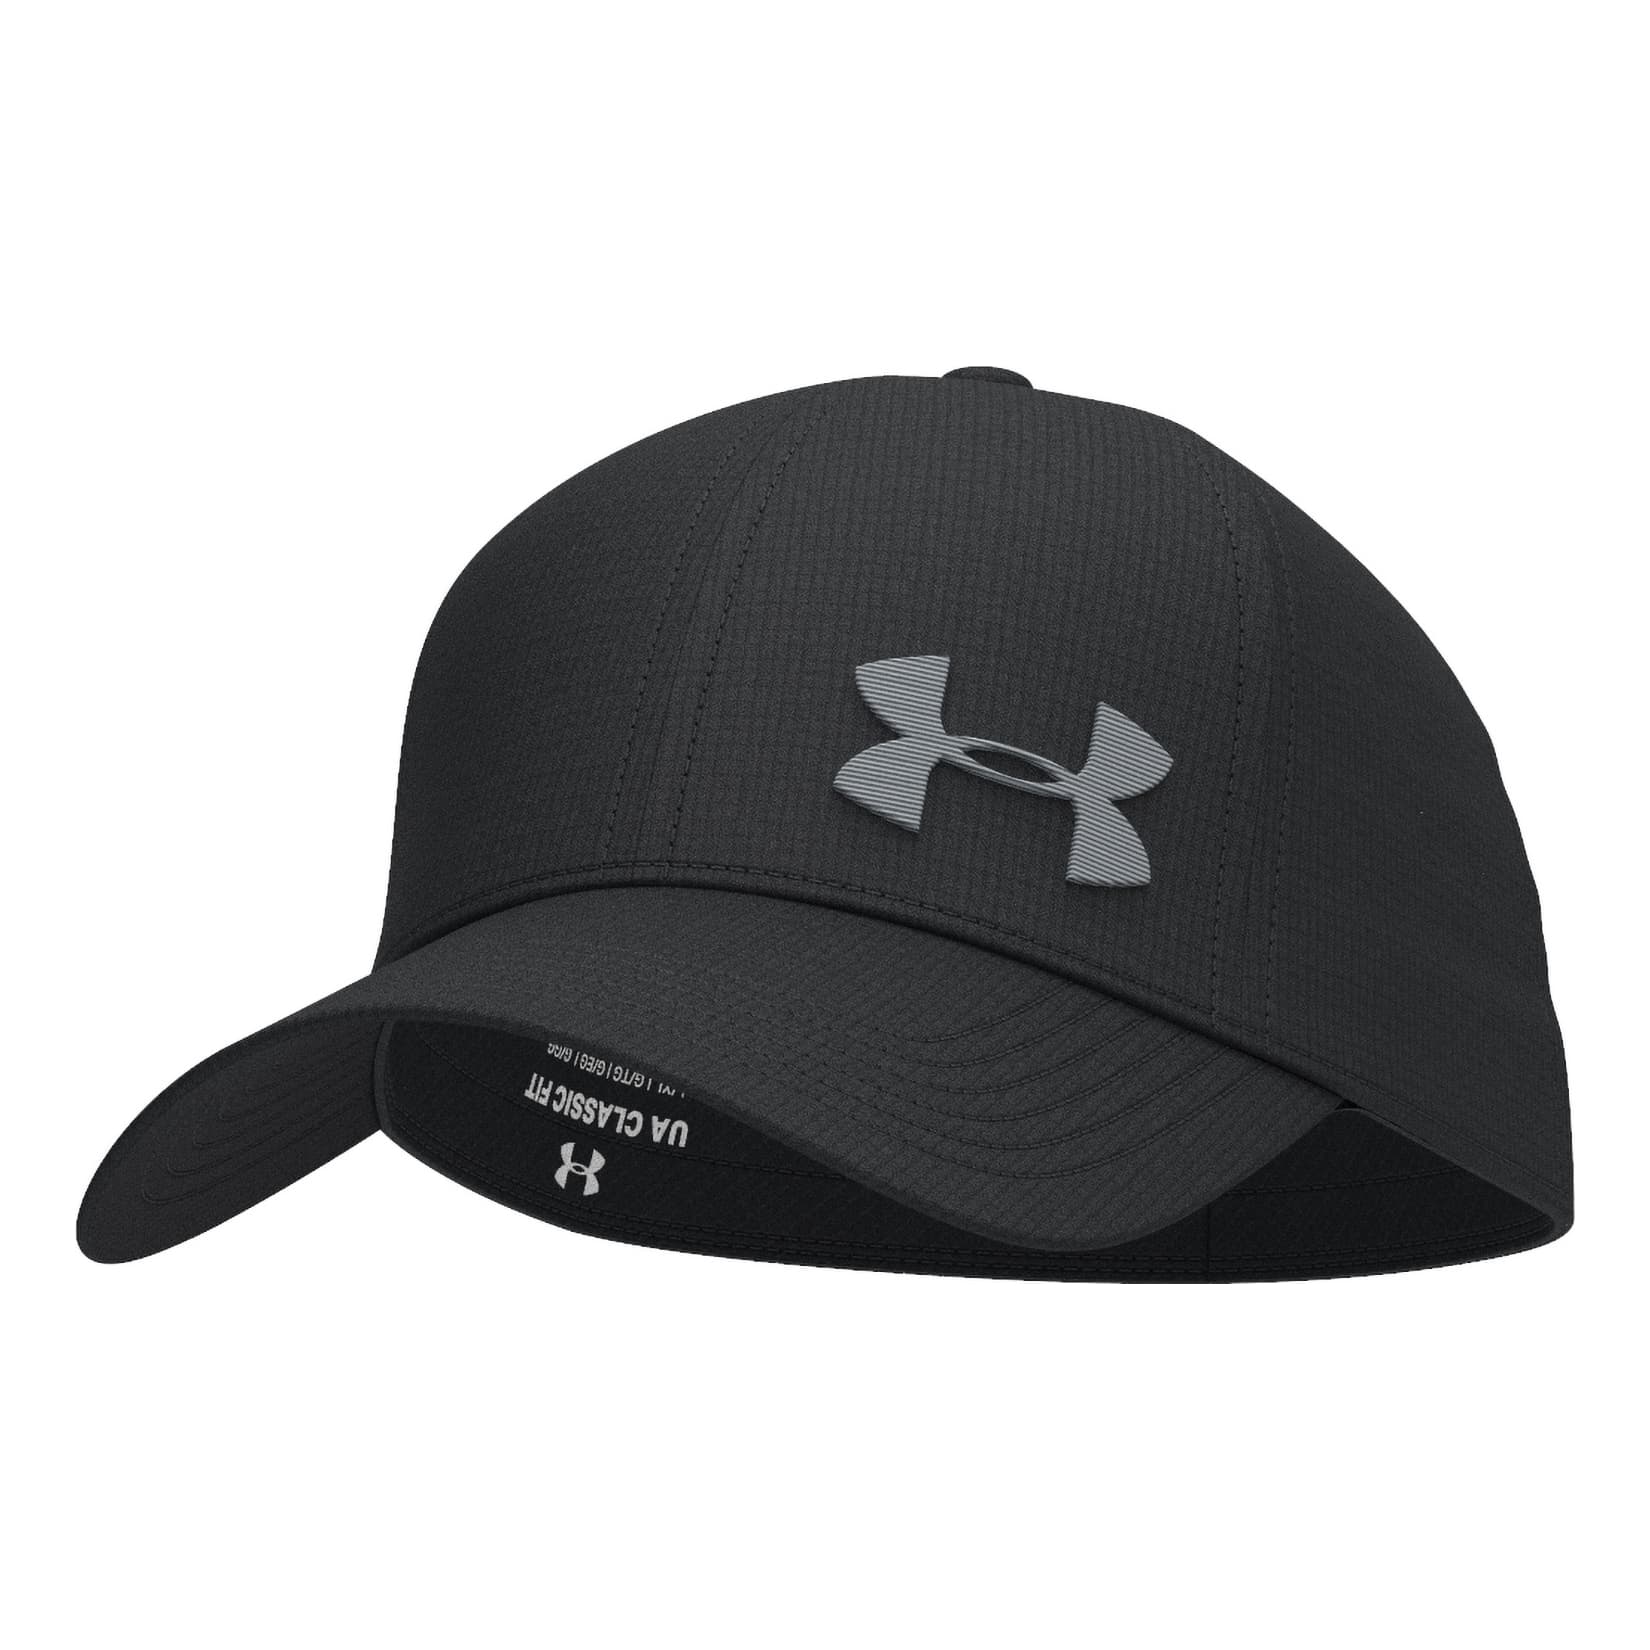 Under Armour® Men’s Iso-Chill ArmourVent™ Stretch Hat - Black/Pitch Grey